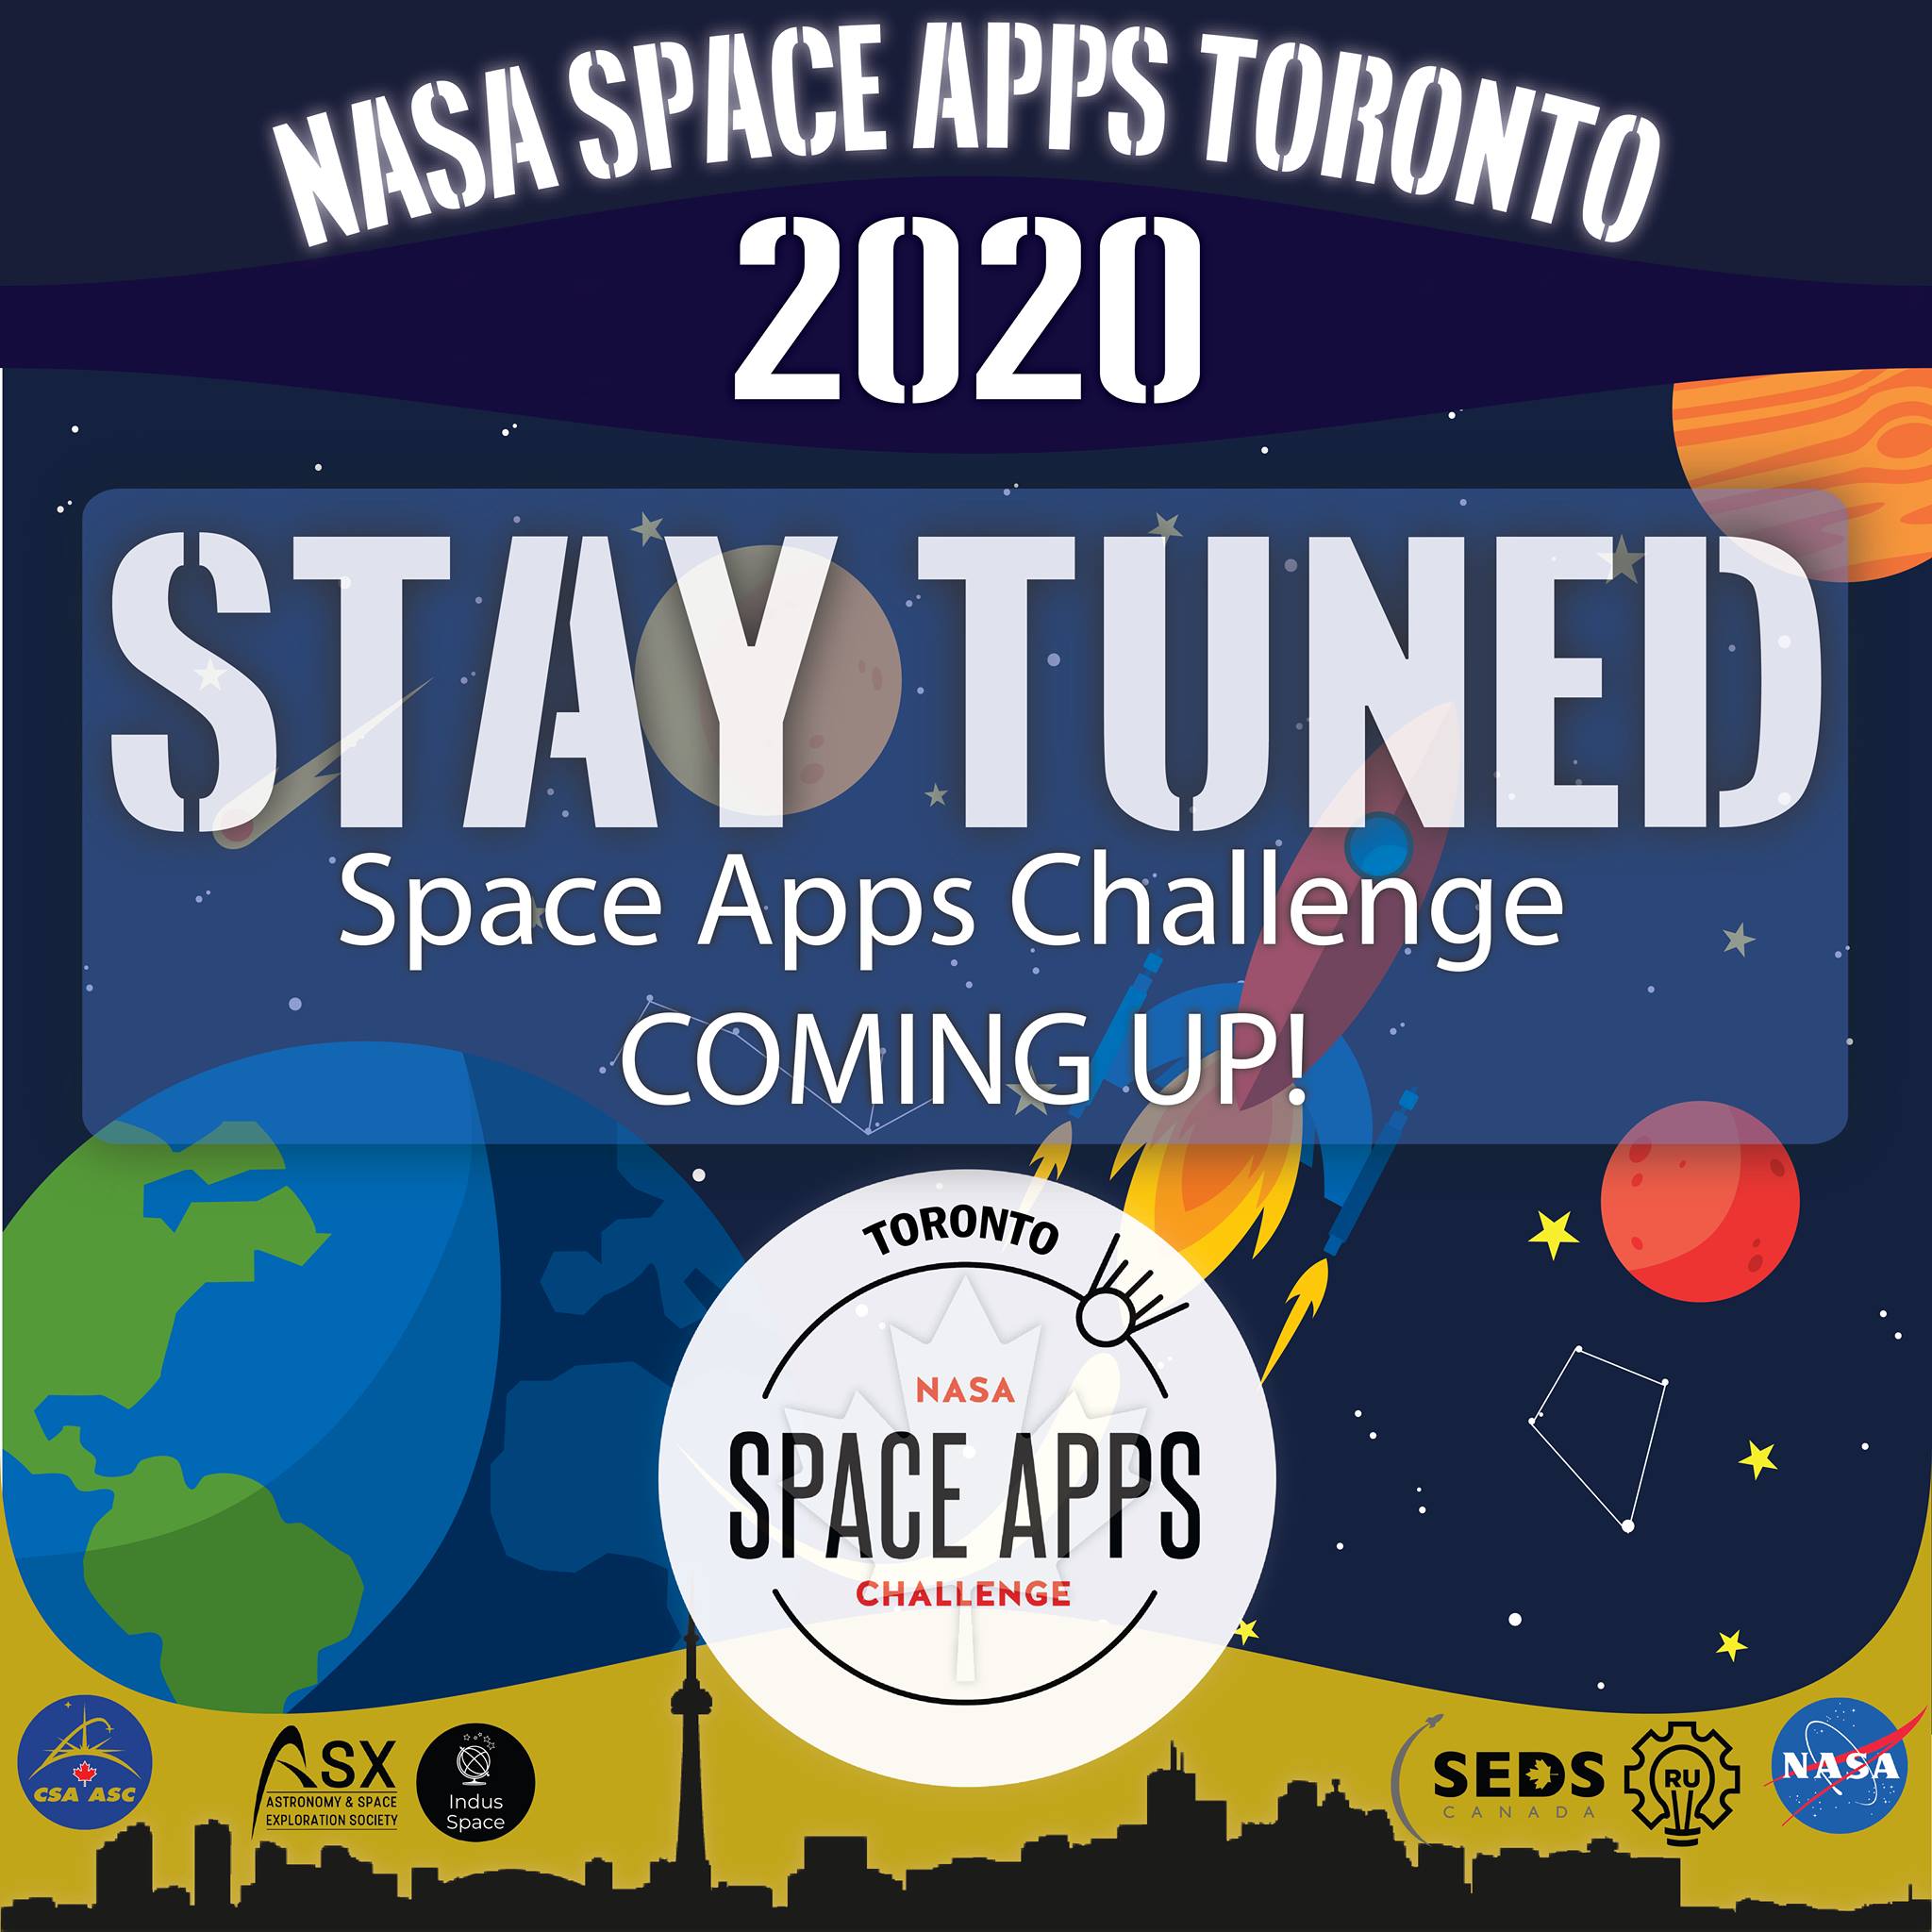 NASA Space Apps Astronomy & Space Exploration Association